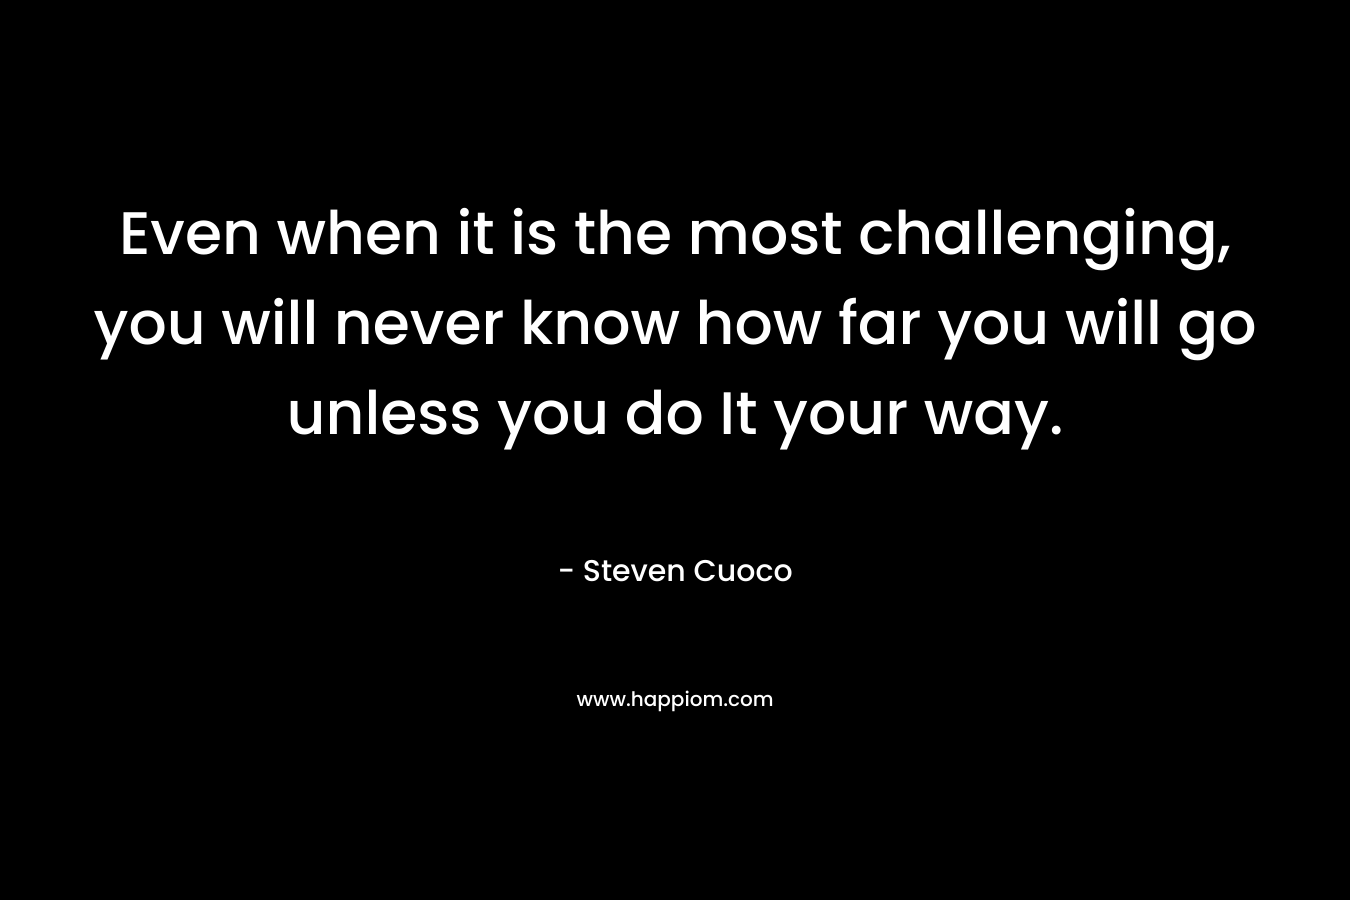 Even when it is the most challenging, you will never know how far you will go unless you do It your way.